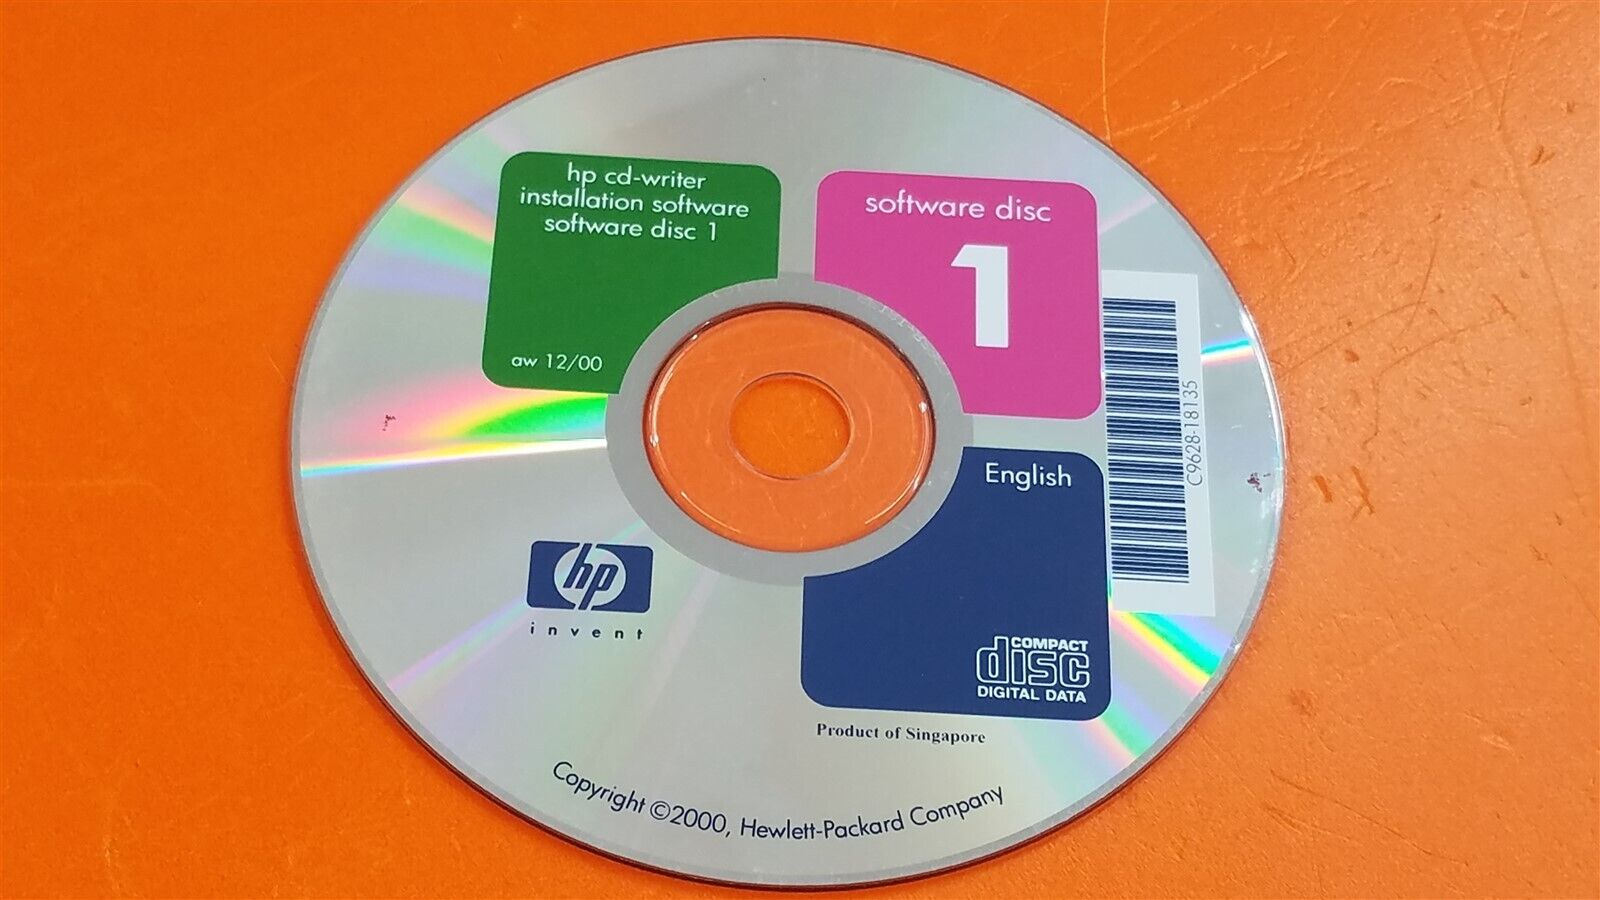 ⭐️⭐️⭐️⭐️⭐️HP Invent Cd-Writer Installation Software Disc 1 aw 12/00